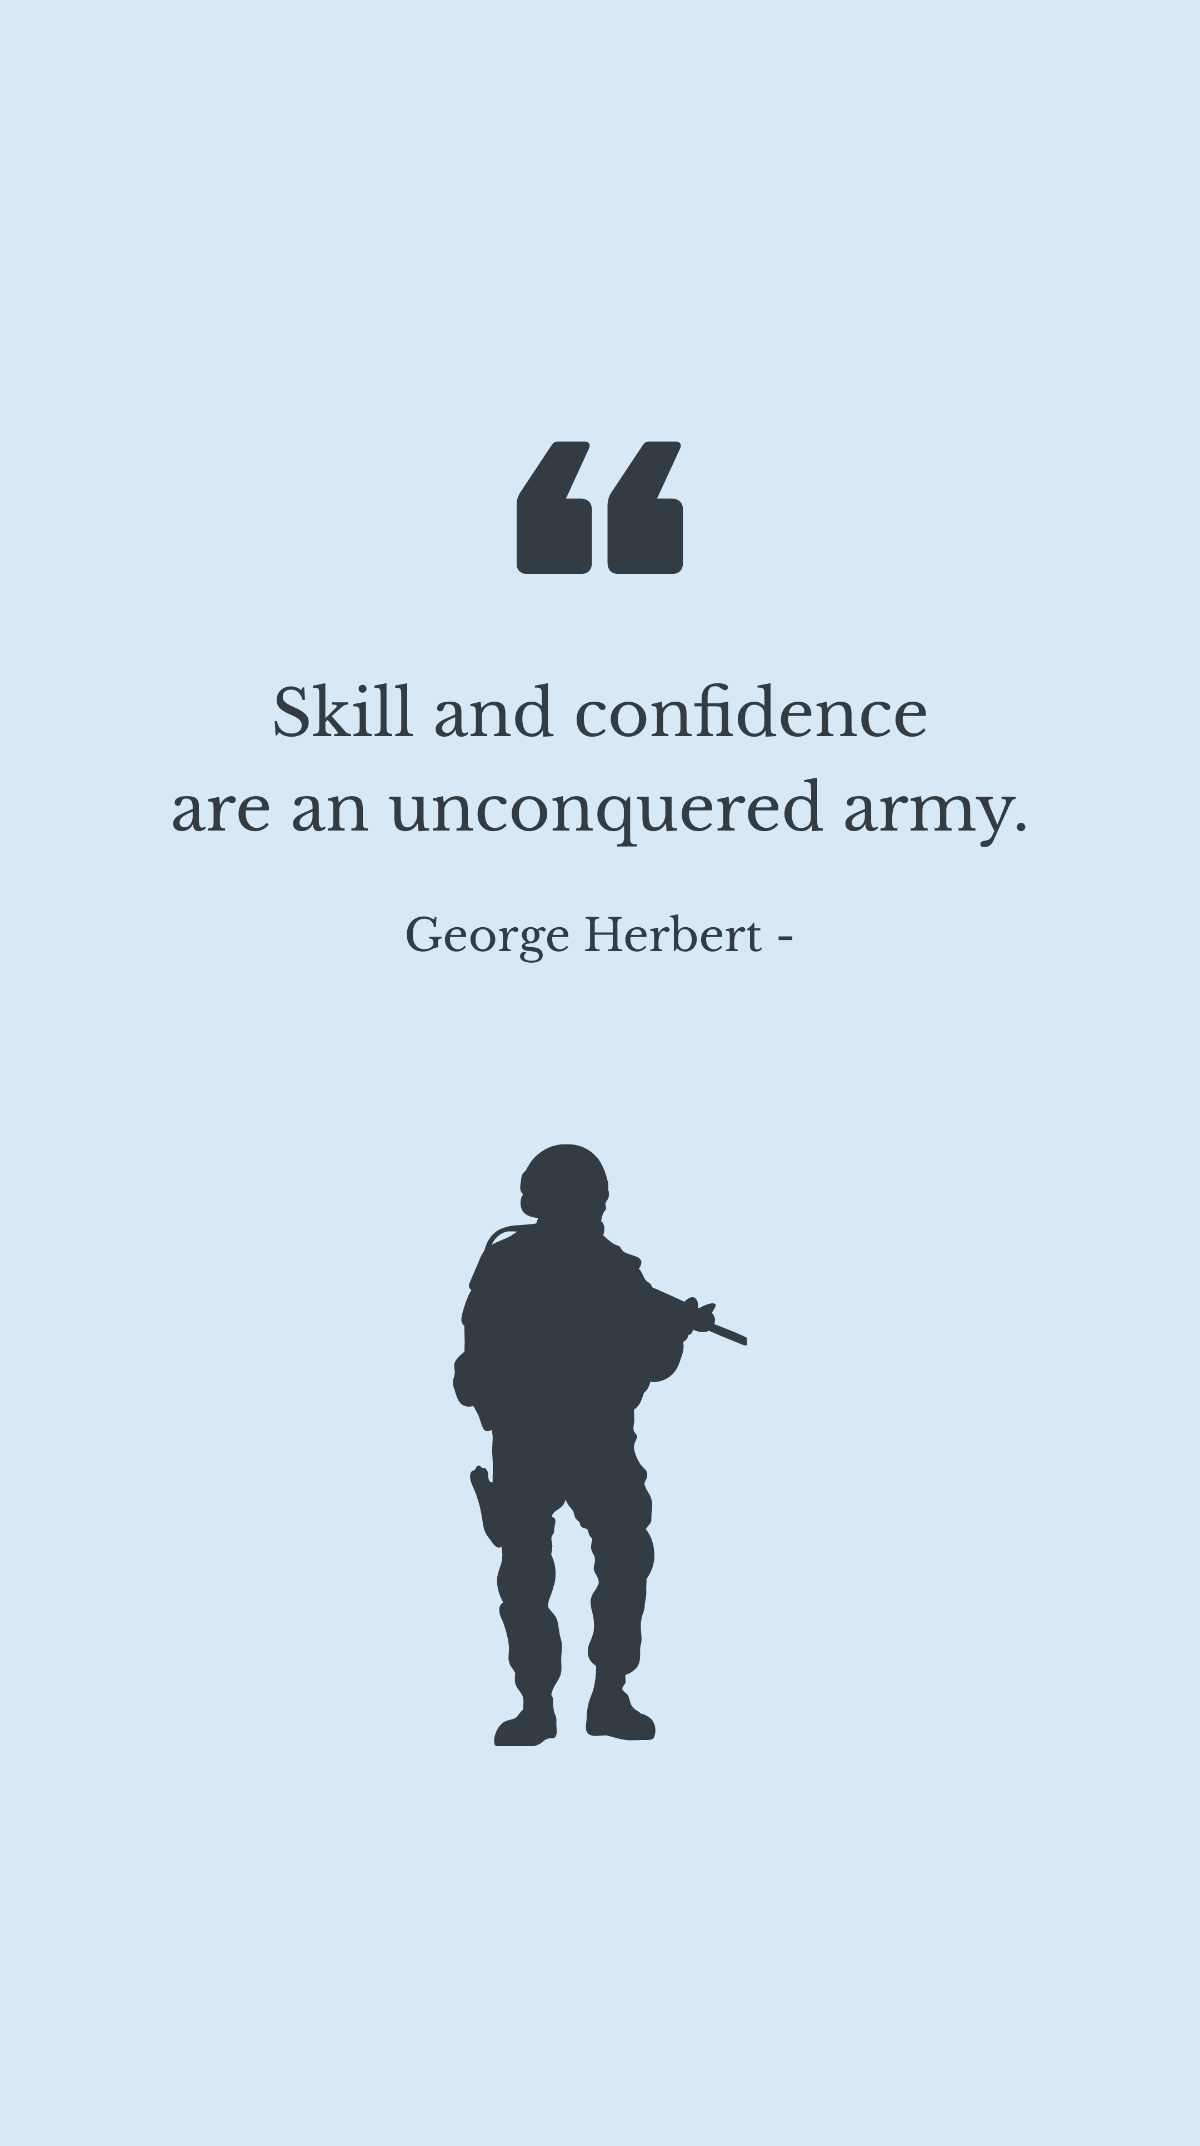 George Herbert - Skill and confidence are an unconquered army.